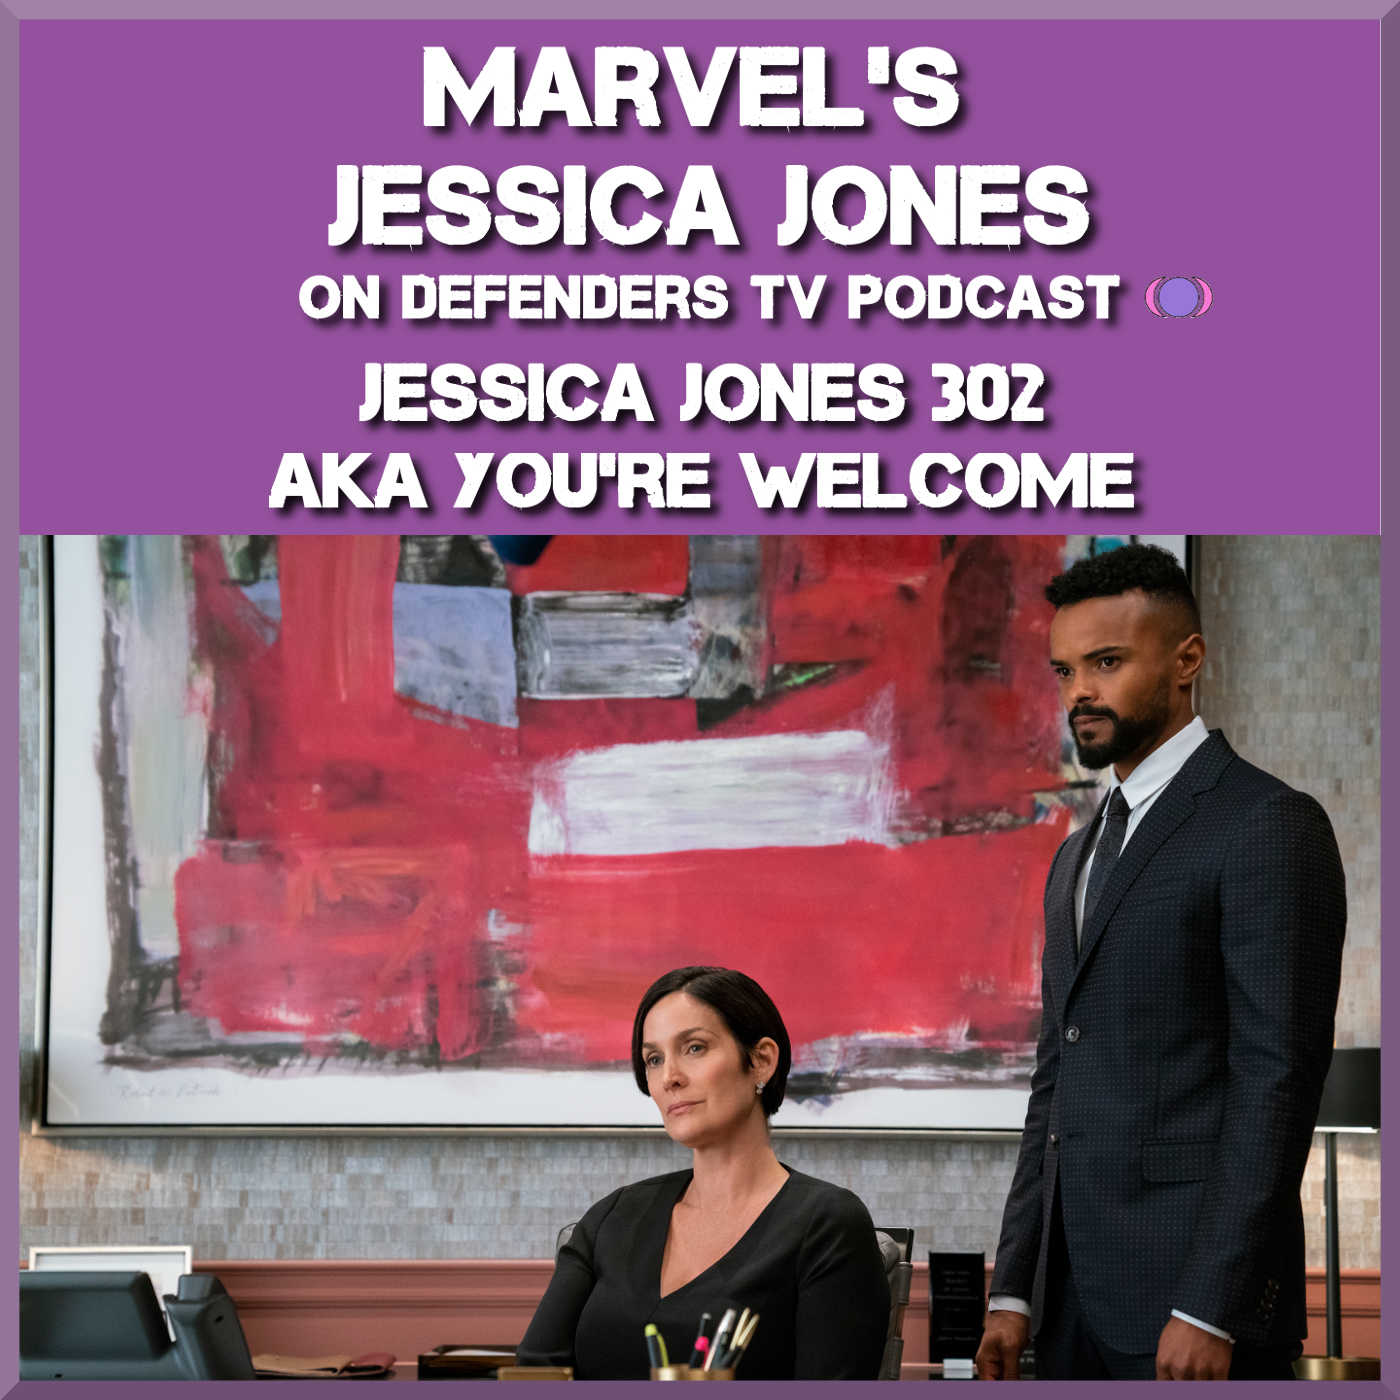 Jessica Jones 302 Review of “AKA You’re Welcome” by TV Podcast Industries